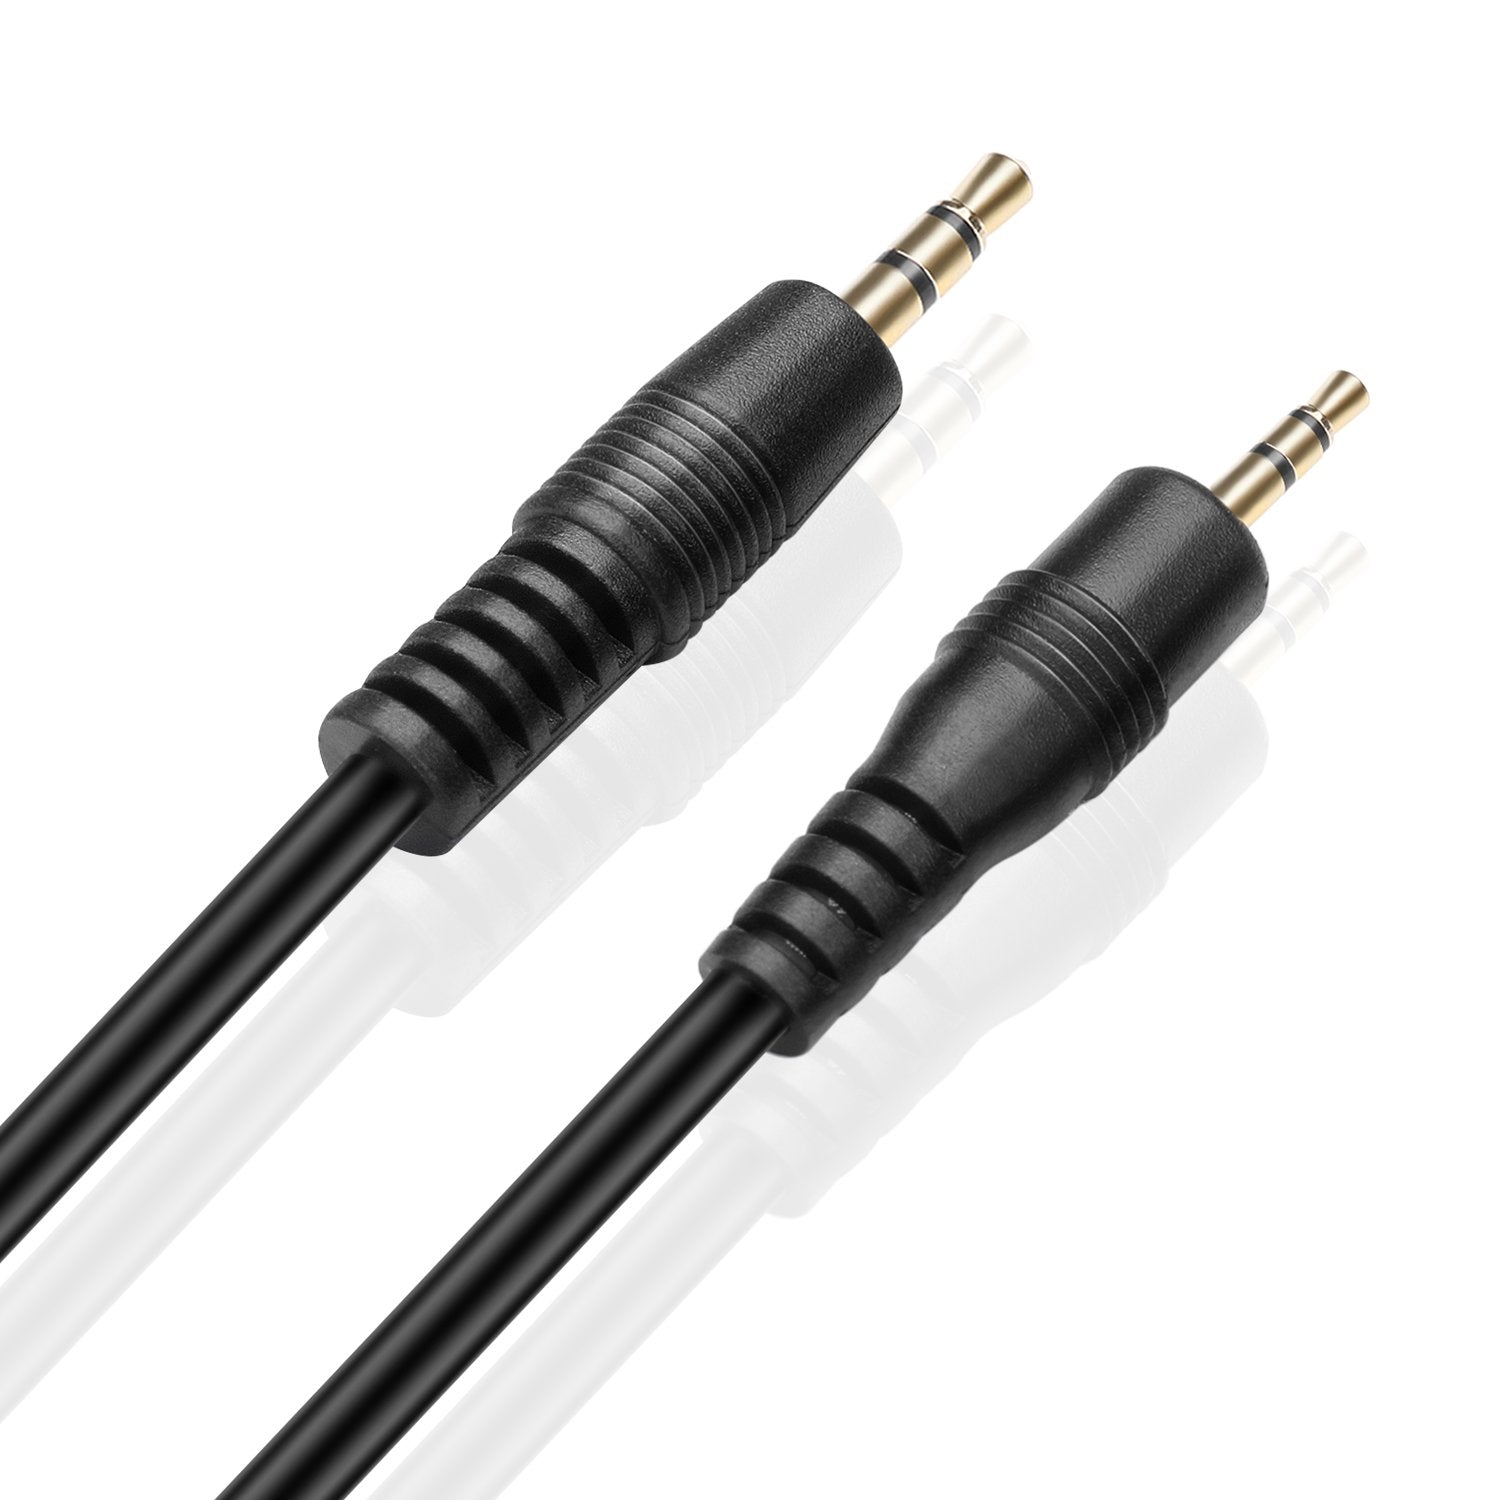 Gen iMax Audio Cable 3.5mm